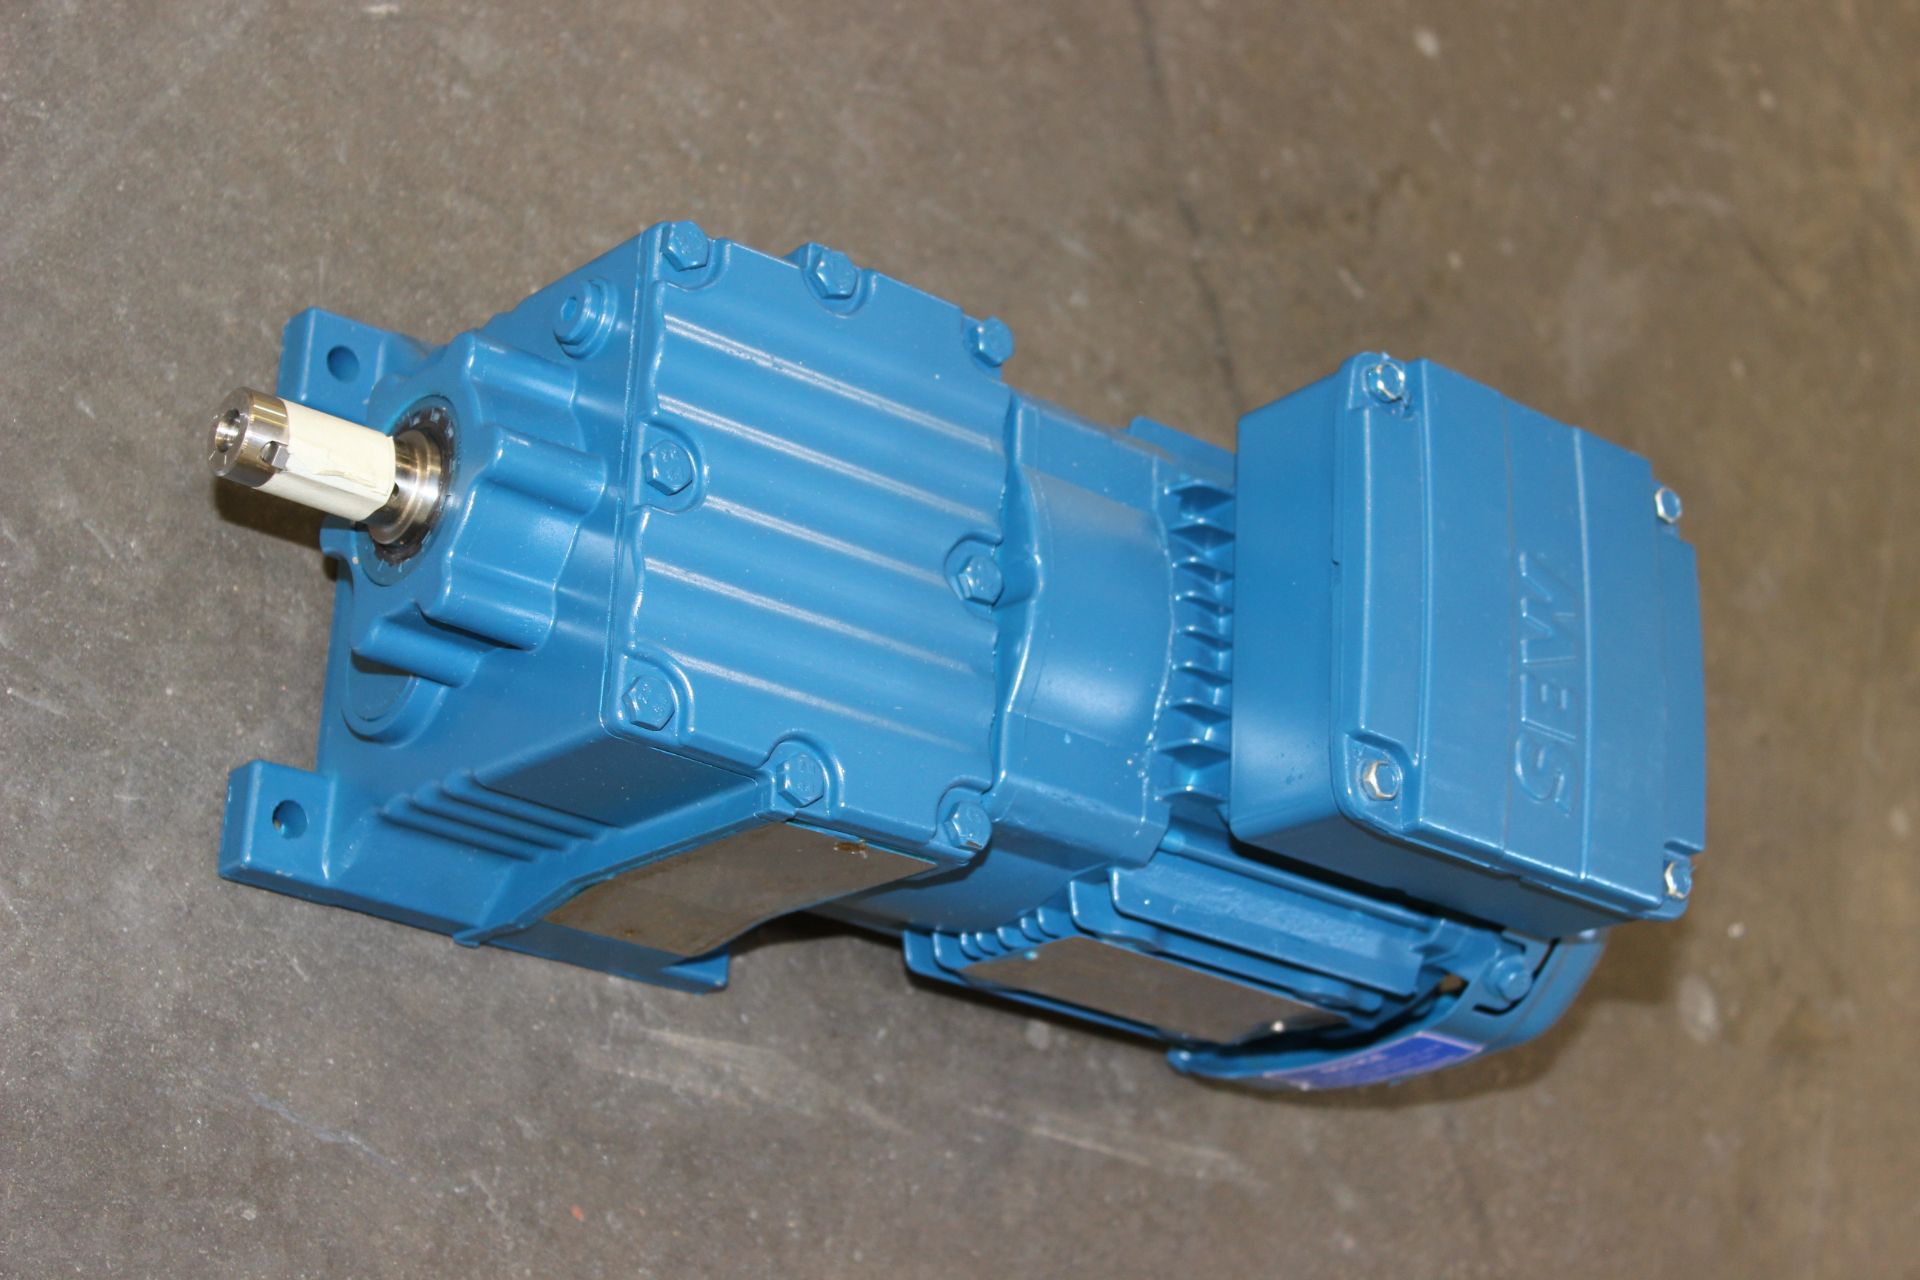 .50 HP SEW-EURODRIVE MOTOR WITH GEARBOX